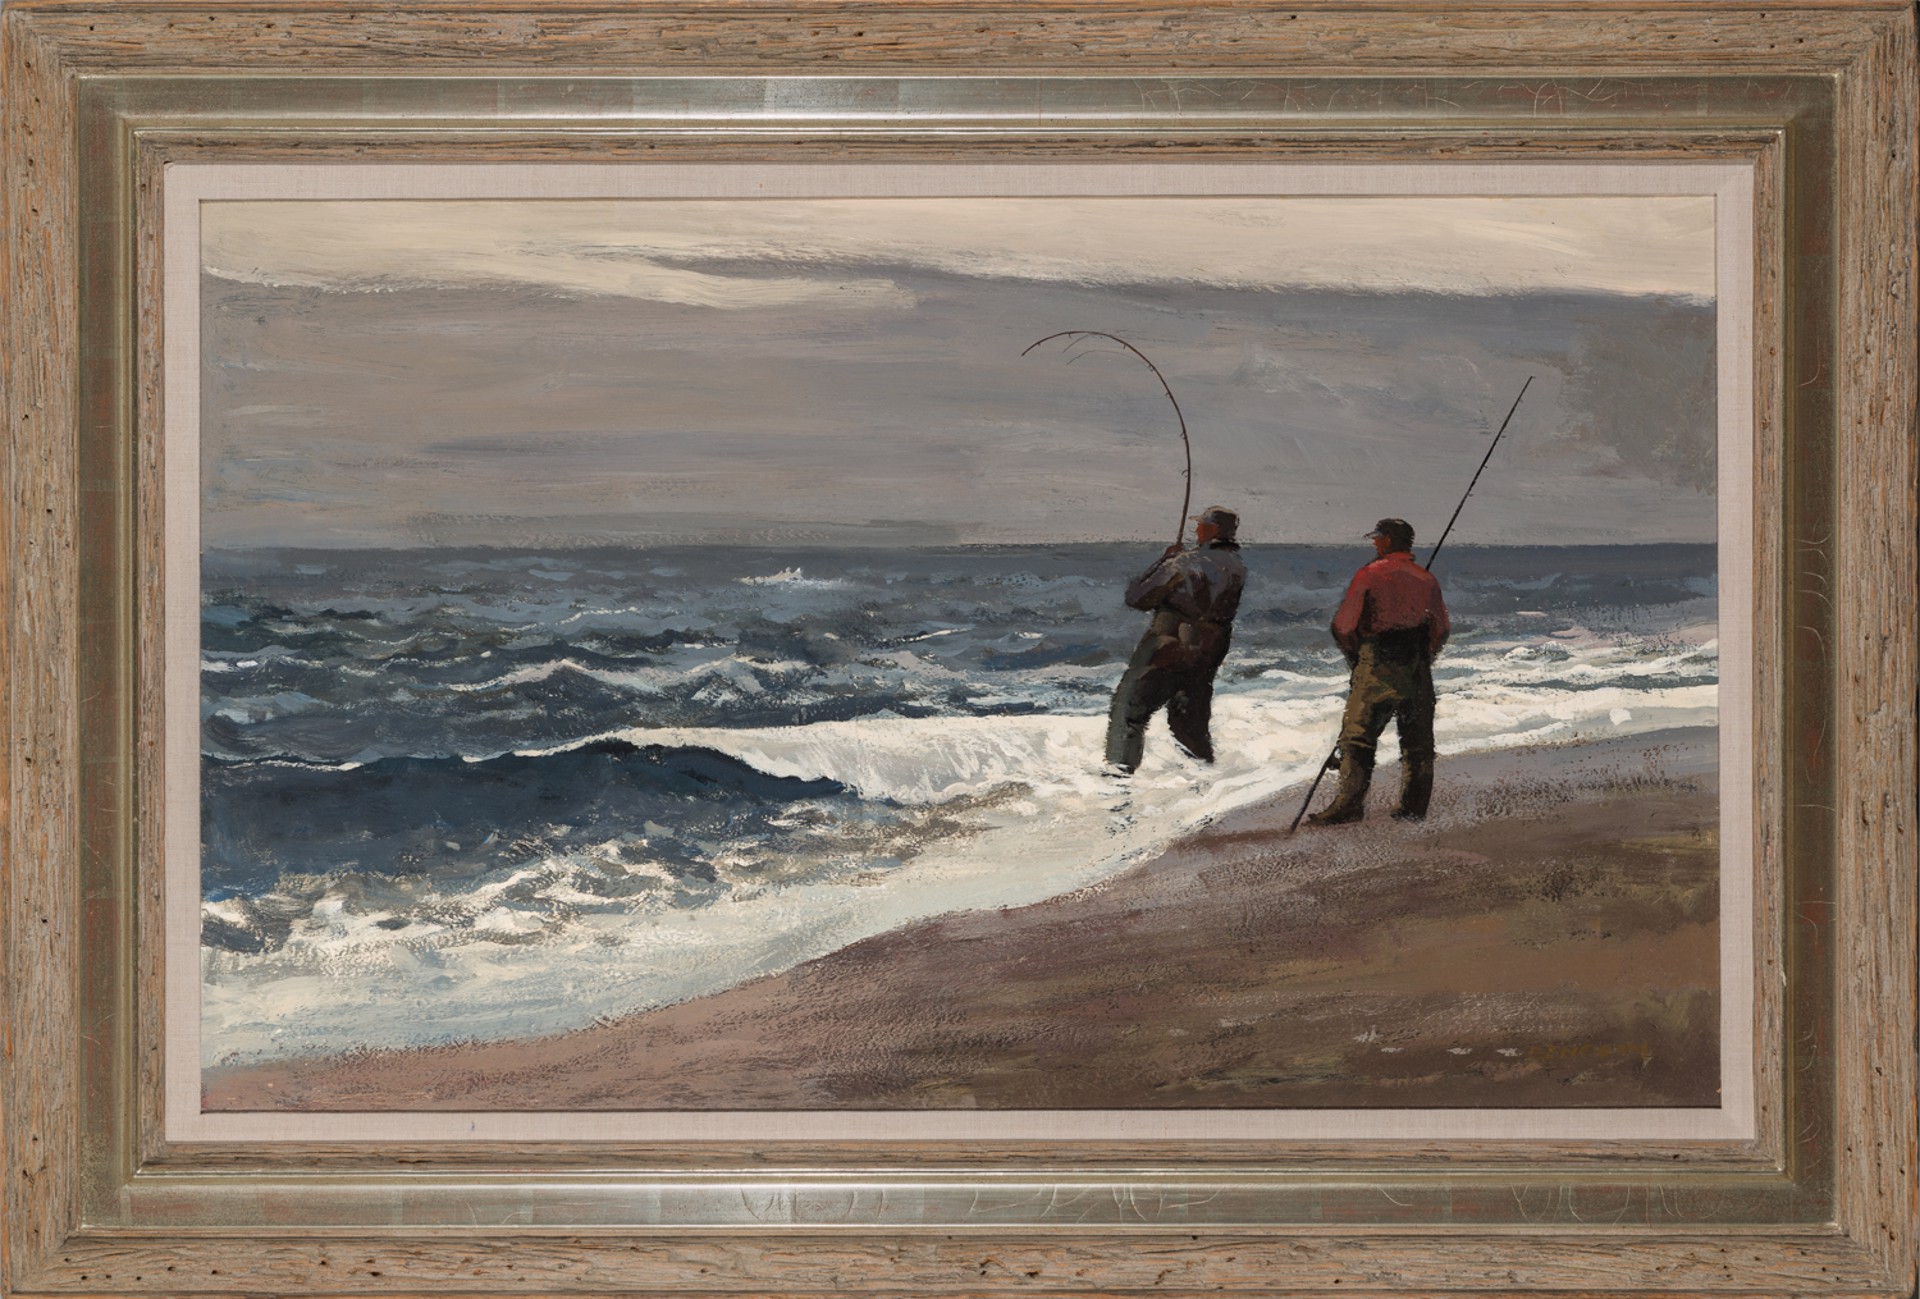 SURF CASTING by Chet Reneson